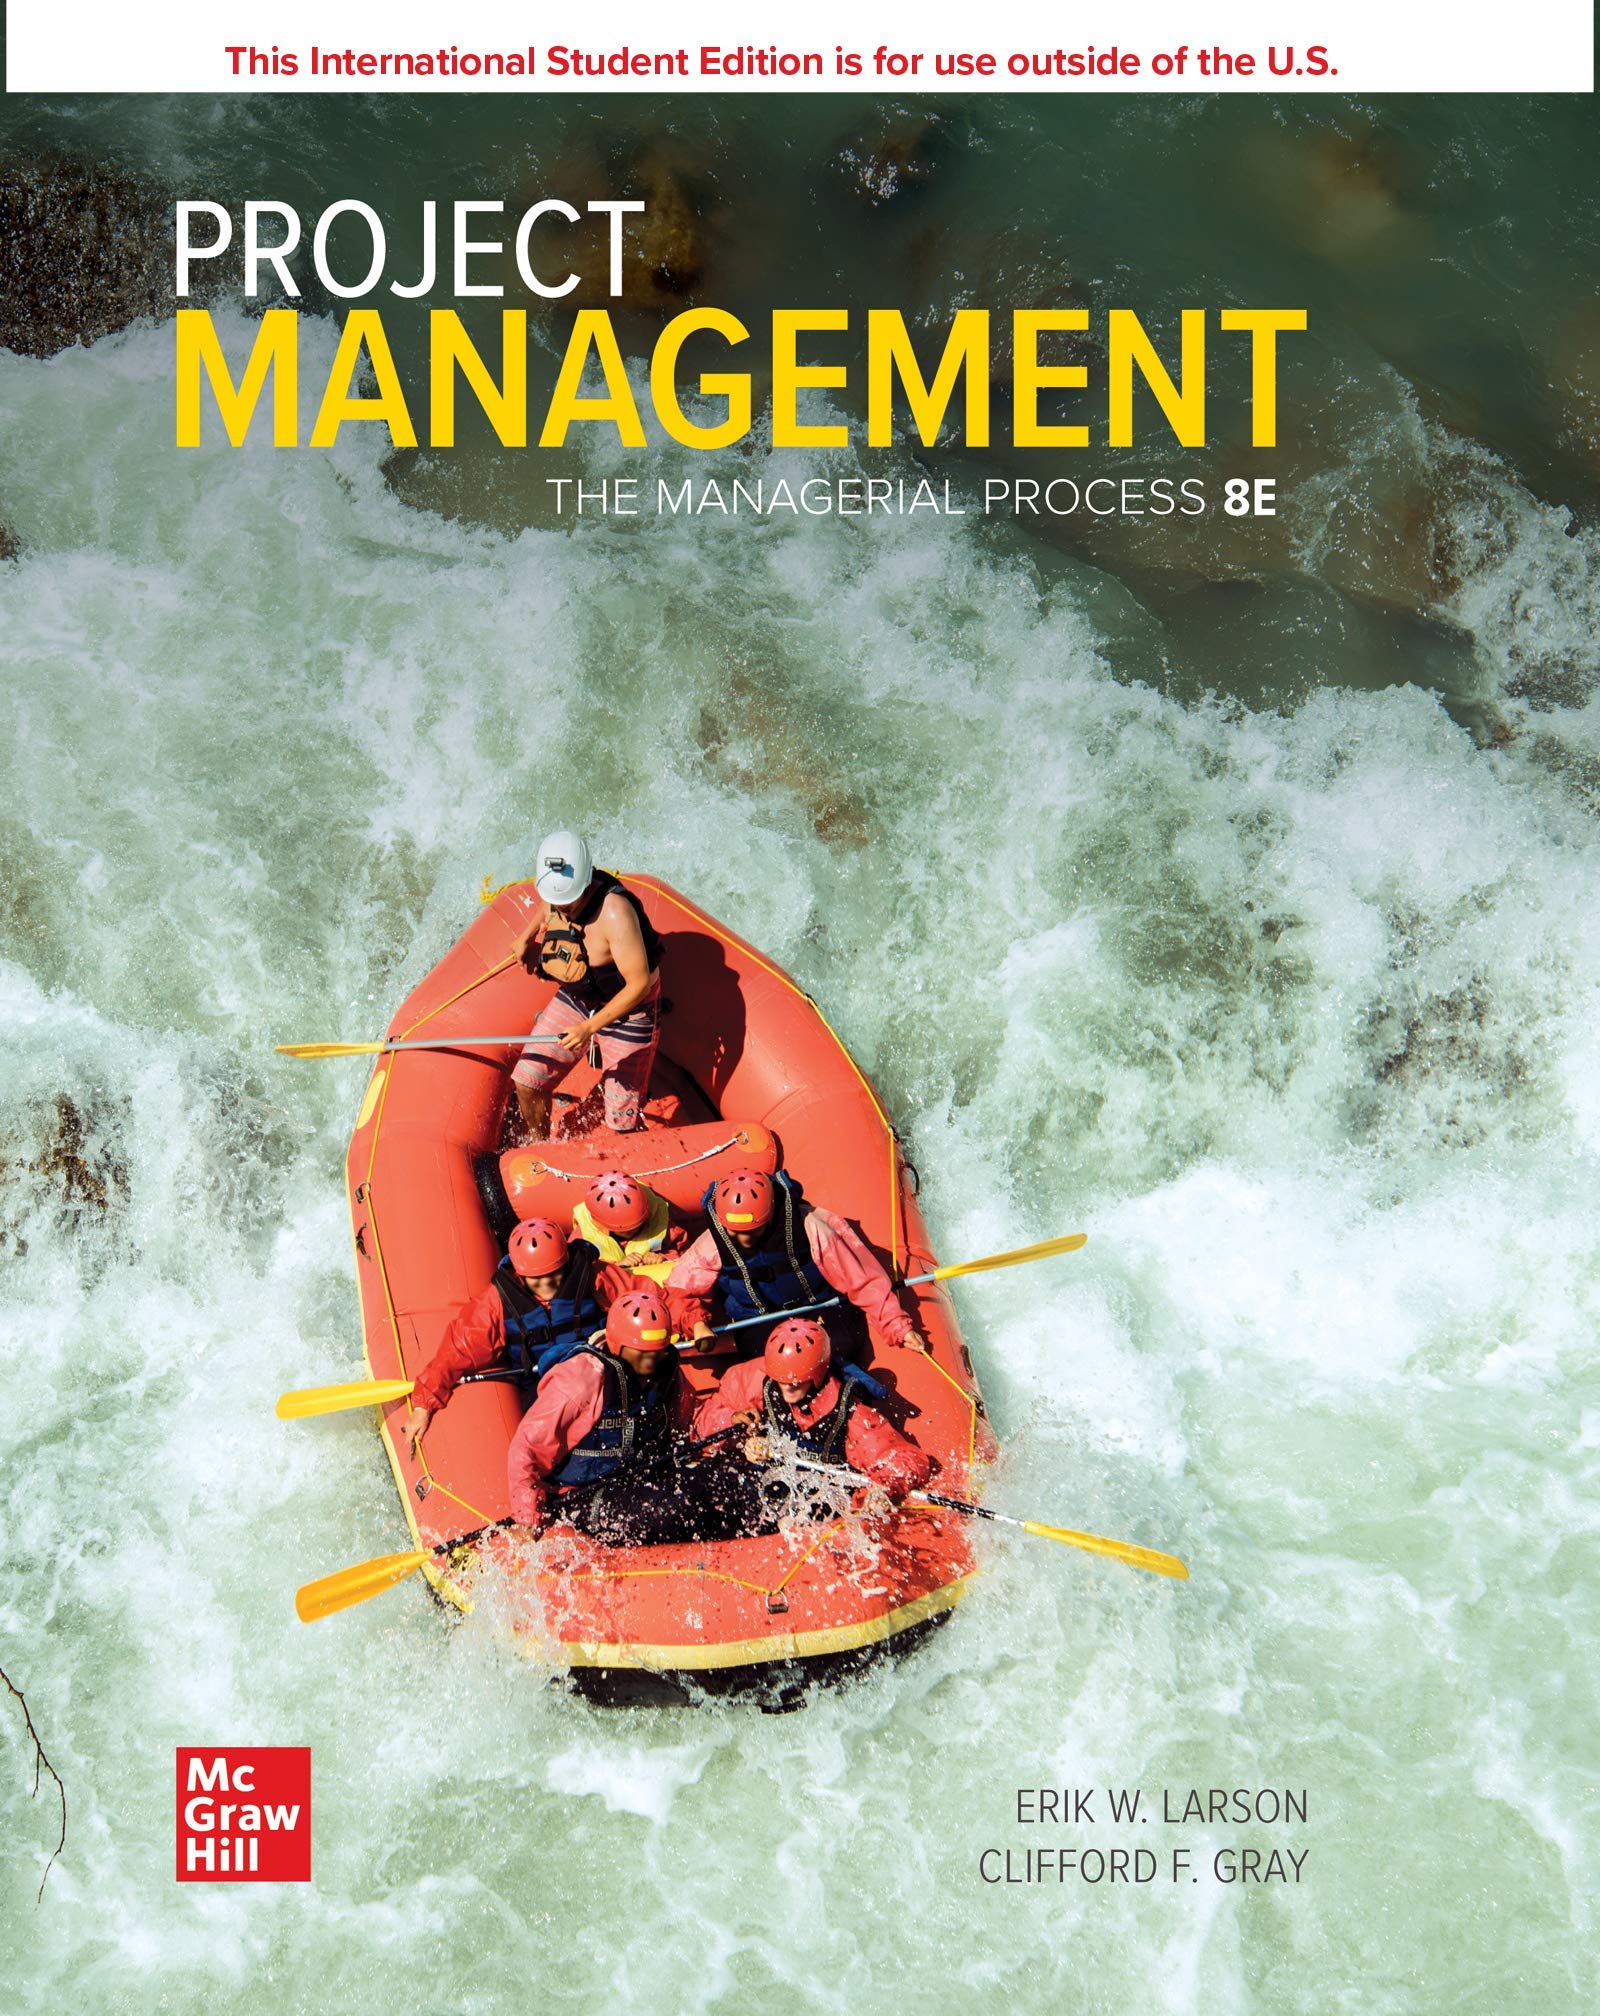 ISE Project Management: The Managerial Process (ISE HED IRWIN OPERATIONS/DEC SCIENCES)